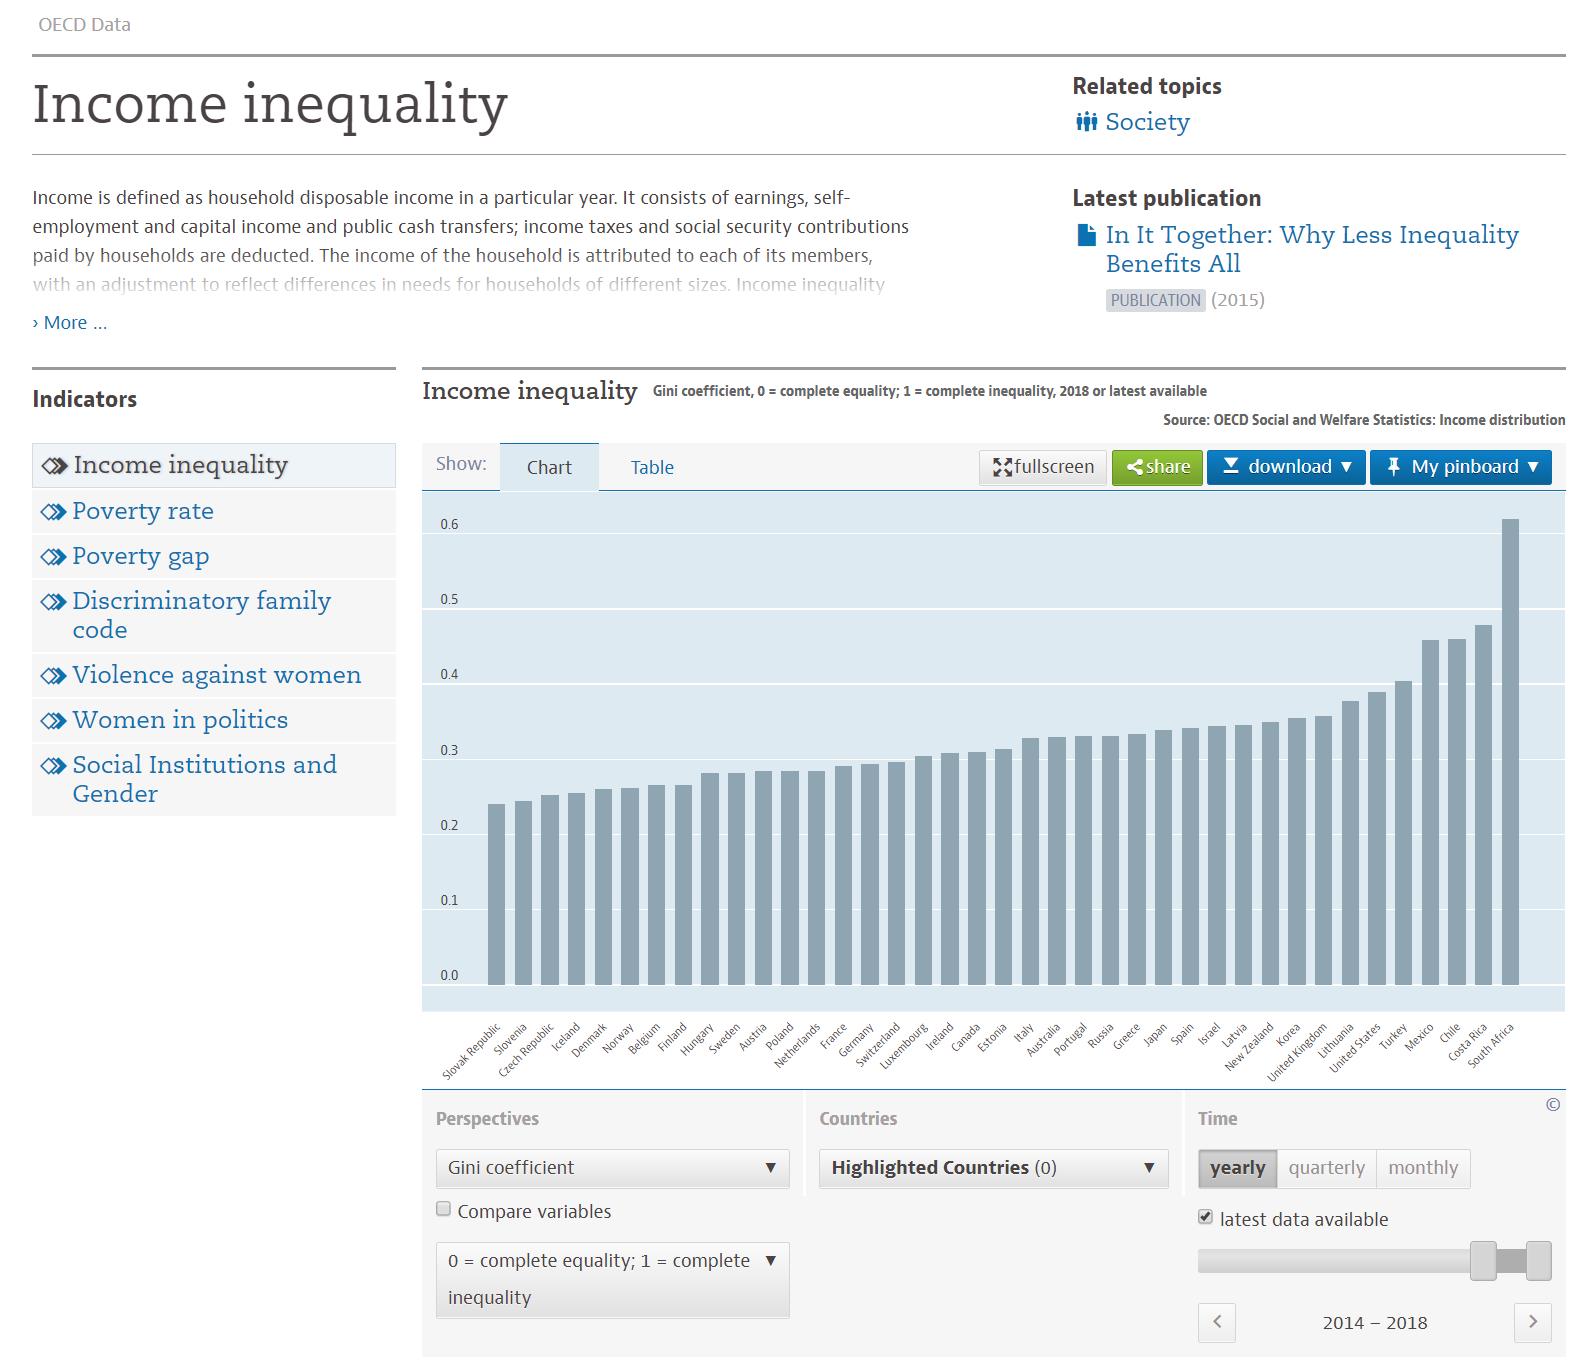 Screenshot of the Income inequality page. The bar chart of income inequality appears on the right and the Gini coefficient bars are in ascending order from left to right in the chart.